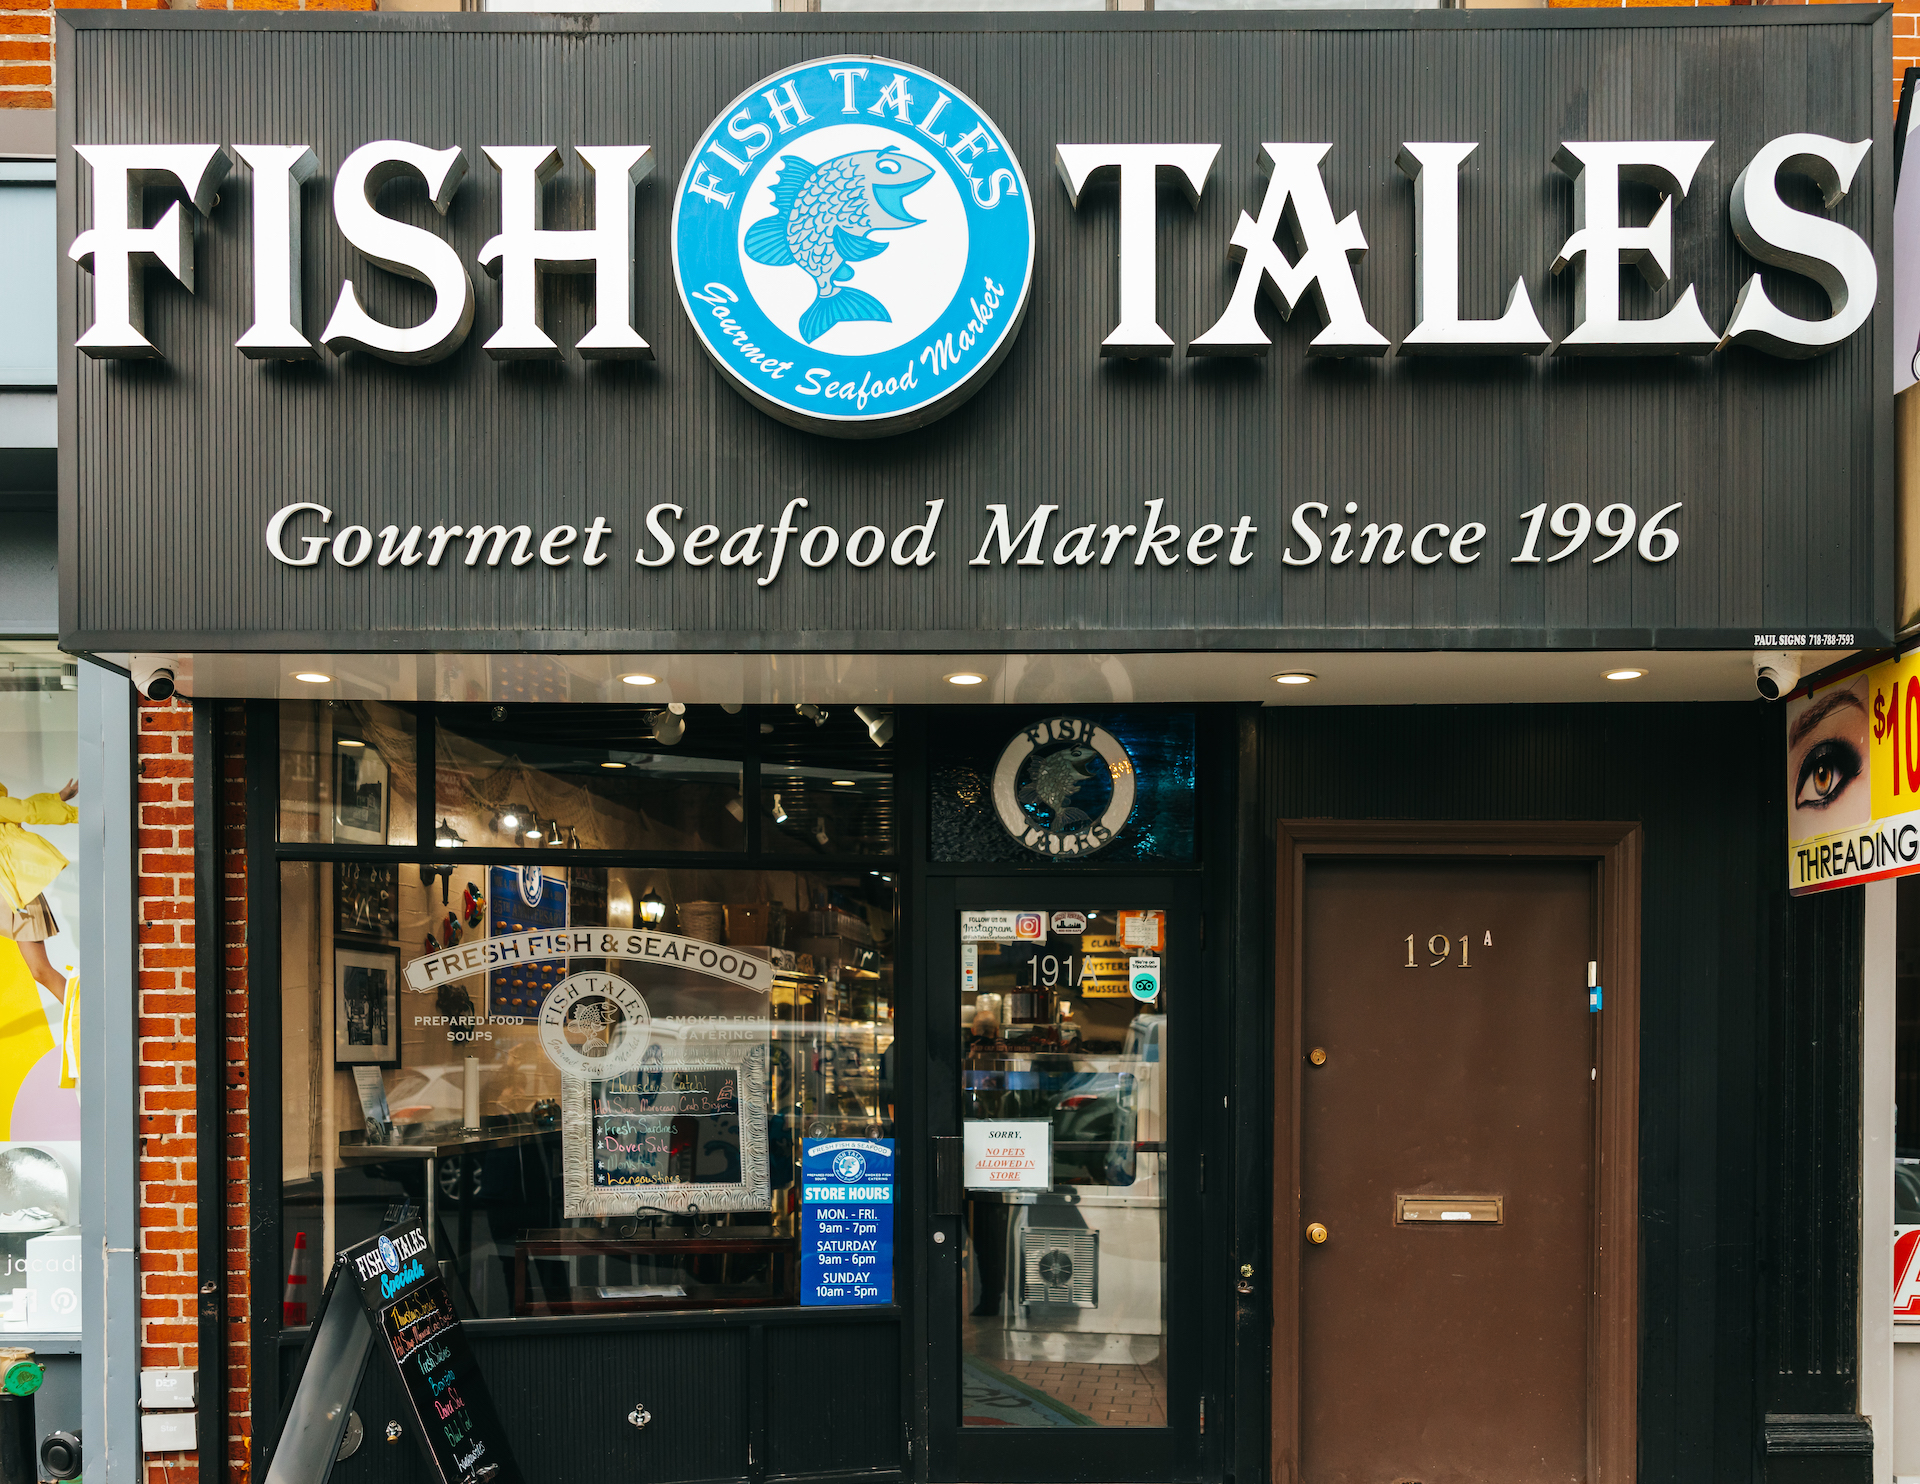 Storefront view of Fish Tales Gourmet Seafood Market located in Cobble Hill, Brooklyn